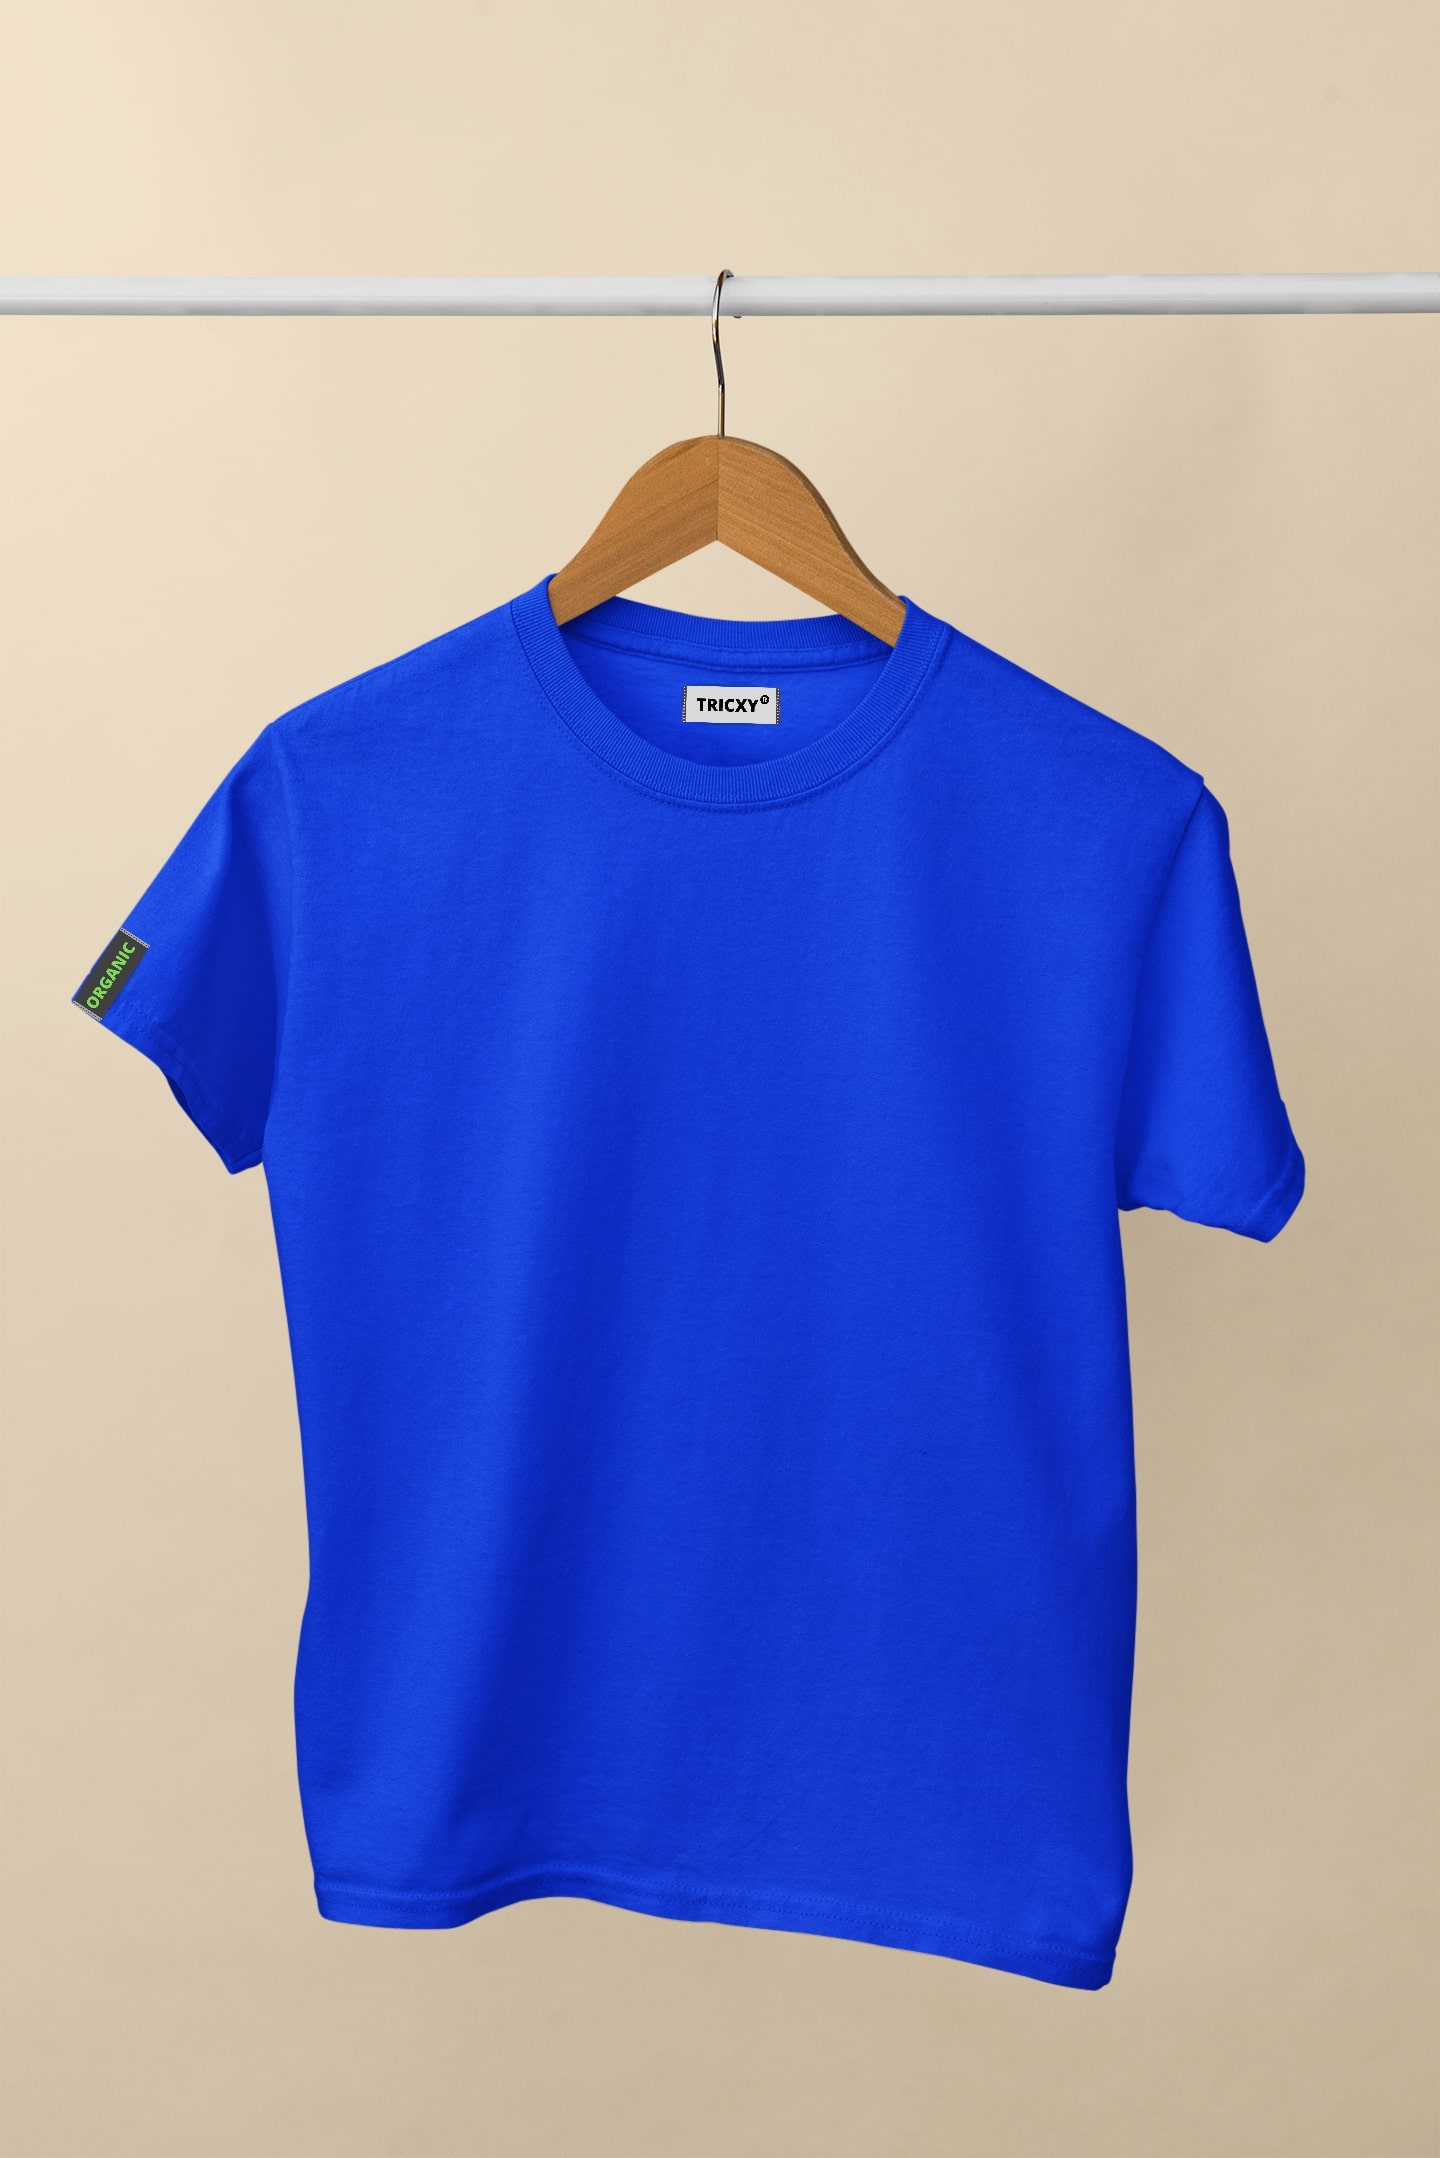 Tricxy plain solids are gives you comfort and solid tees are made with 100% organic cotton bio washed fabric feeling comfort to wear.